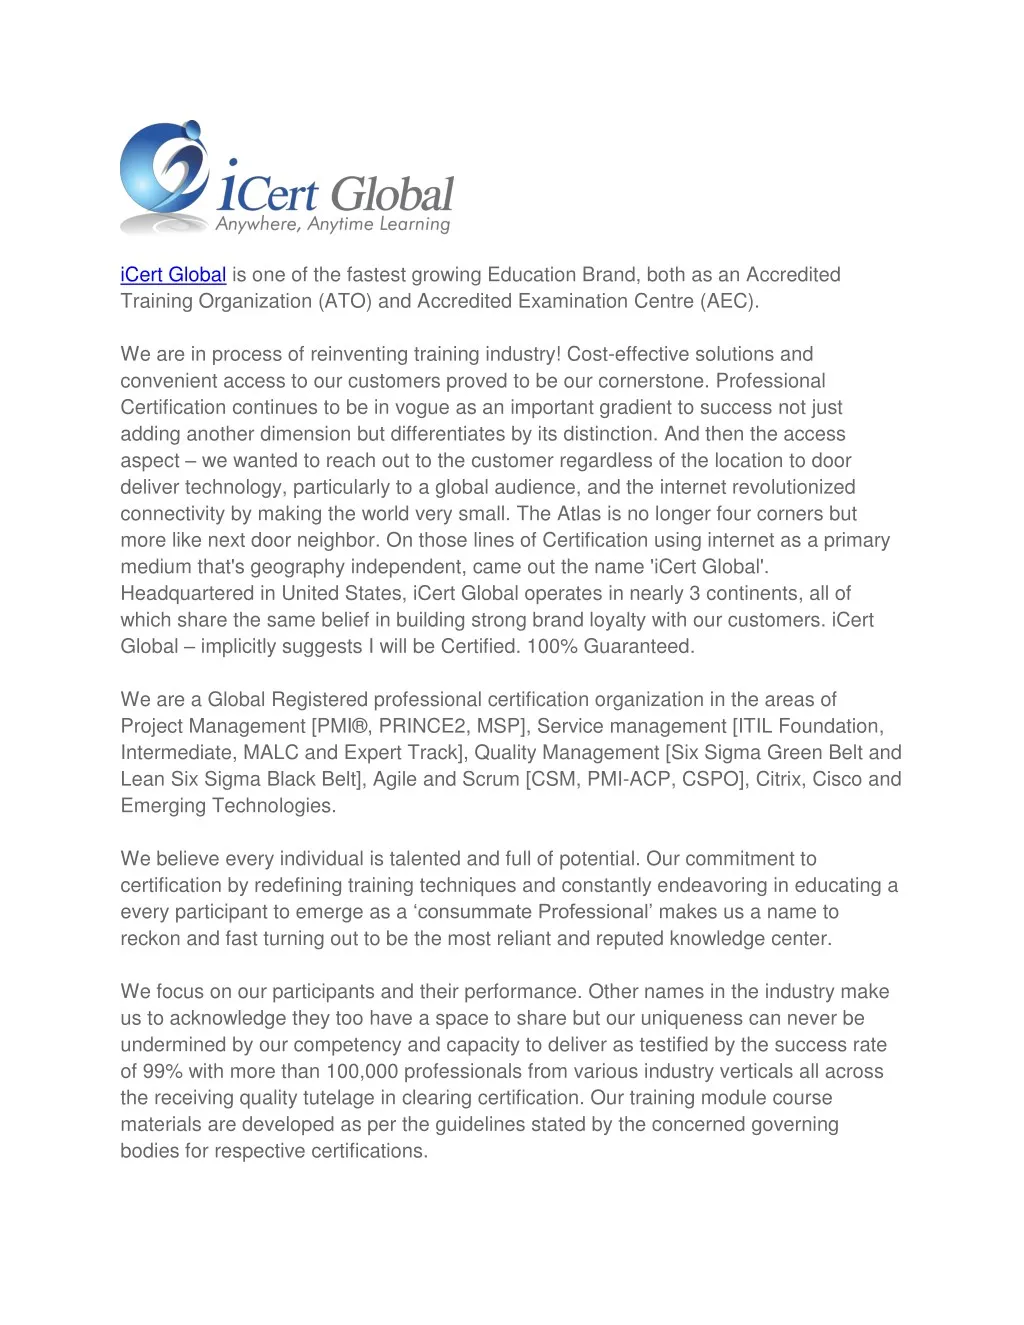 icert global is one of the fastest growing